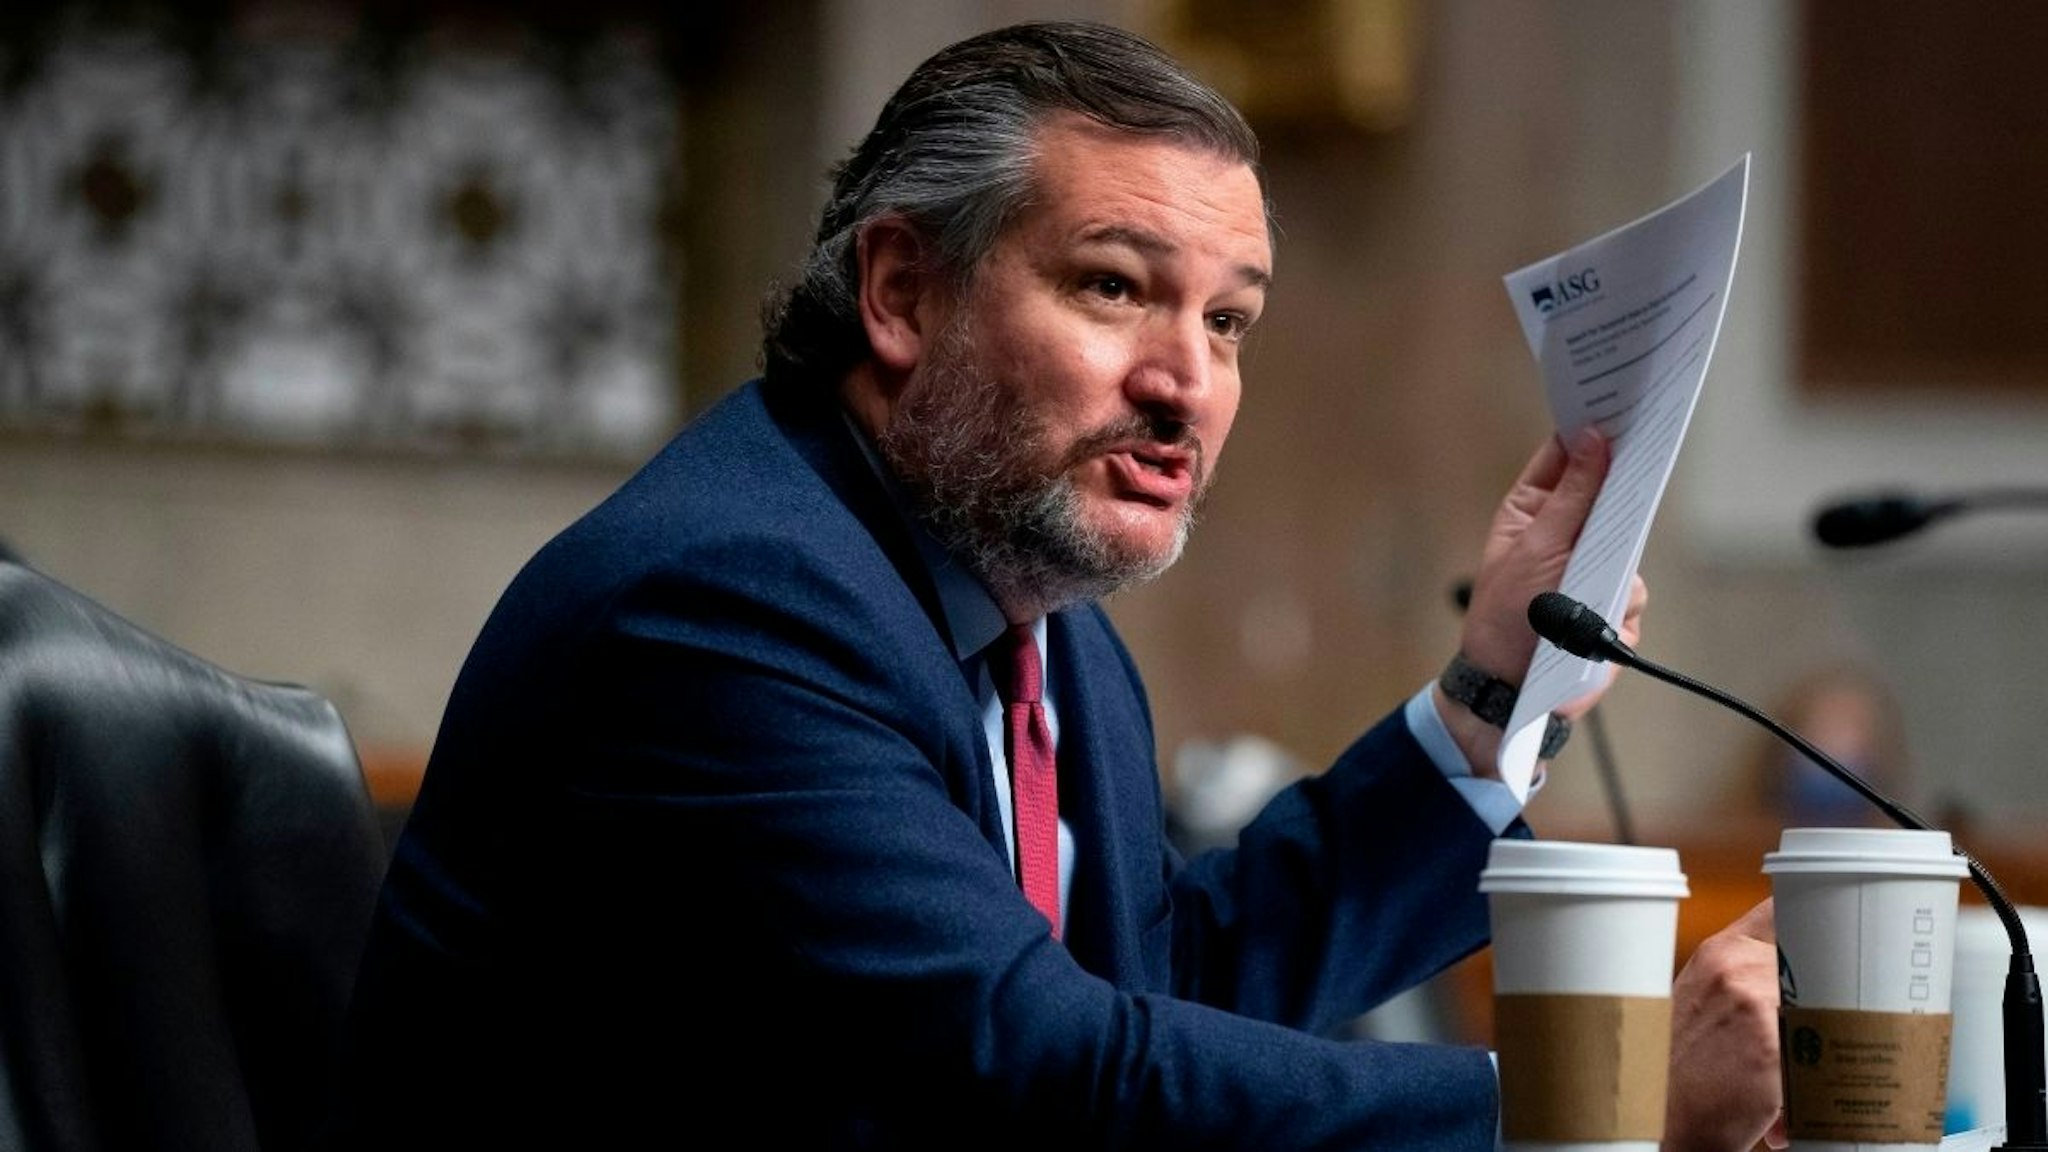 Republican Senator from Texas Ted Cruz holds a copy of a 2019 speech by Linda Thomas-Greenfield that was delivered at 'Confucius Institute' at Savannah State University, during the Senate Foreign Relations Committee hearing on the nomination of Linda Thomas-Greenfield to be the United States Ambassador to the United Nations, on Capitol Hill in Washington, DC, on January 27, 2021. (